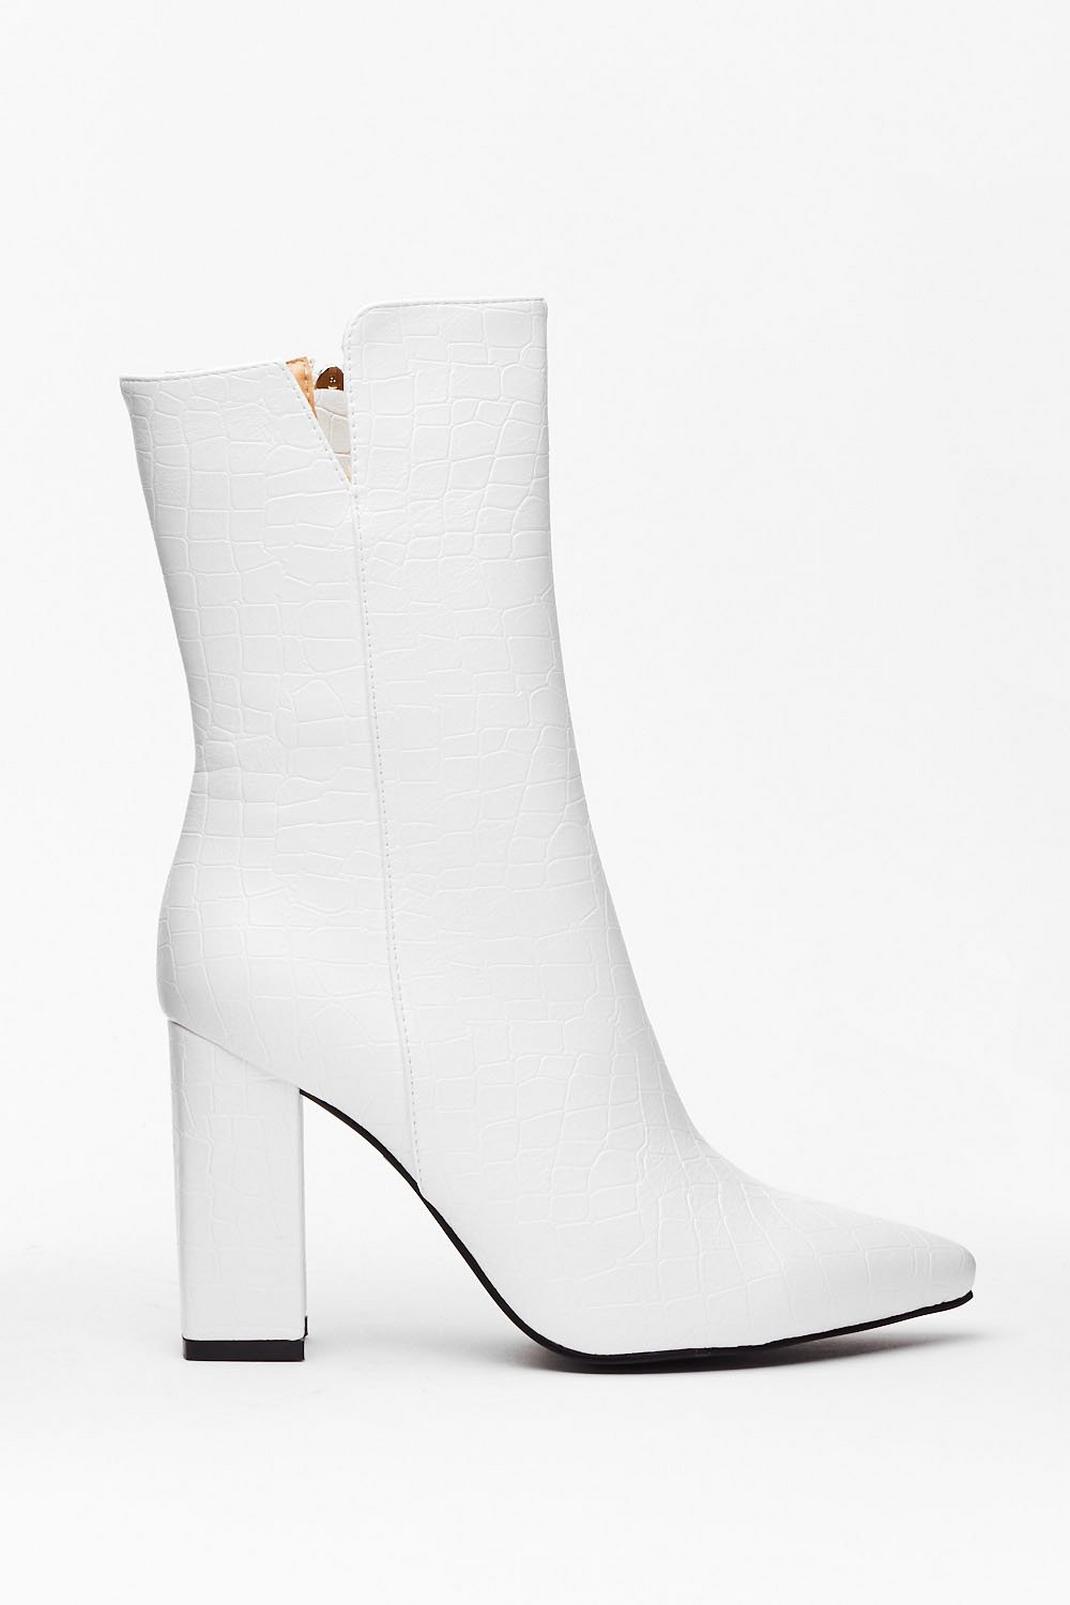 Faux Leather High Ankle Boots with Croc Embossed Design | Nasty Gal